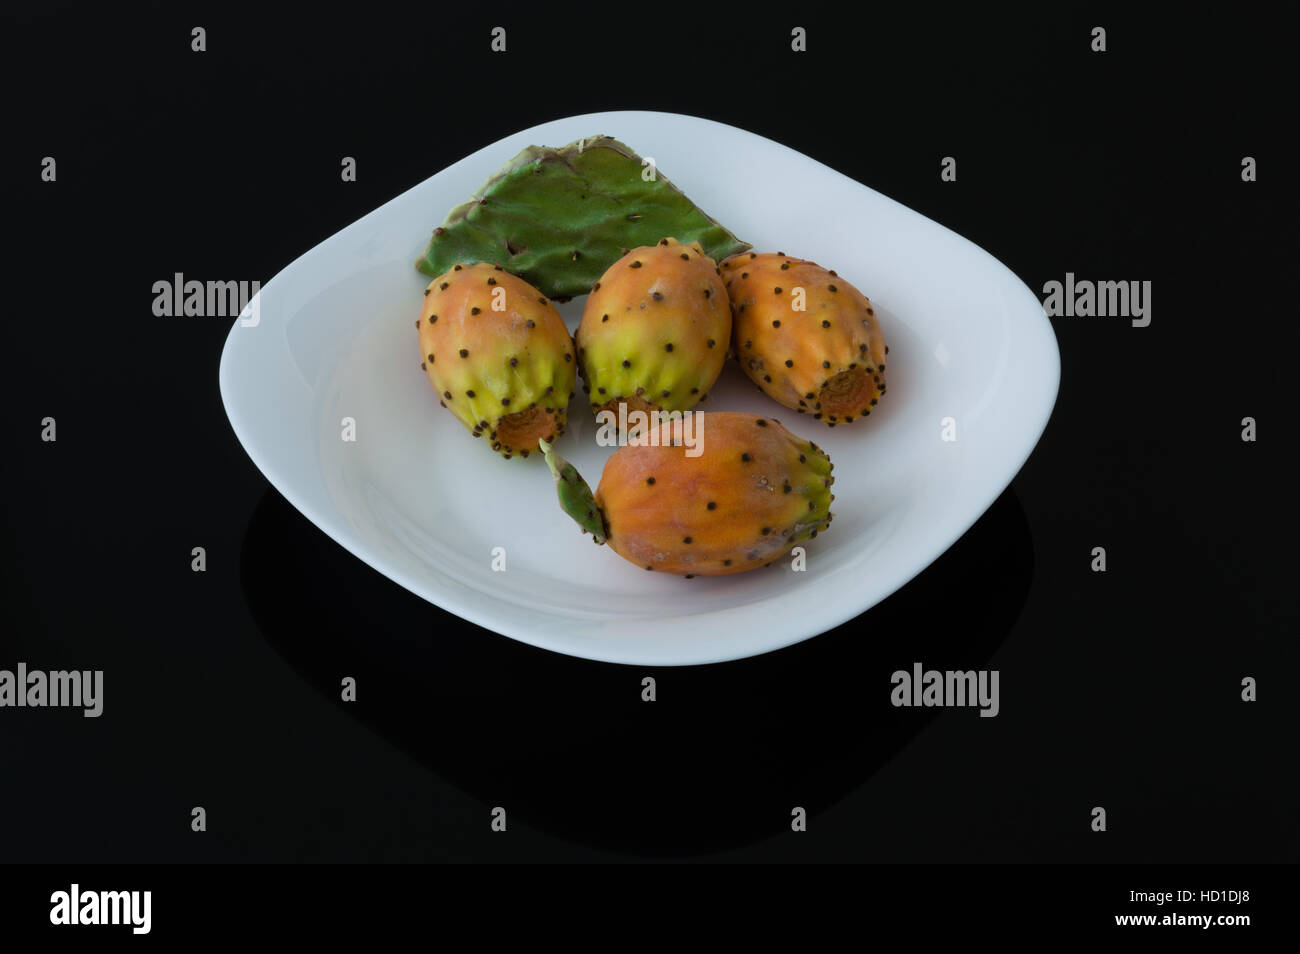 Prickly pear cactus fruits in a white plate Stock Photo